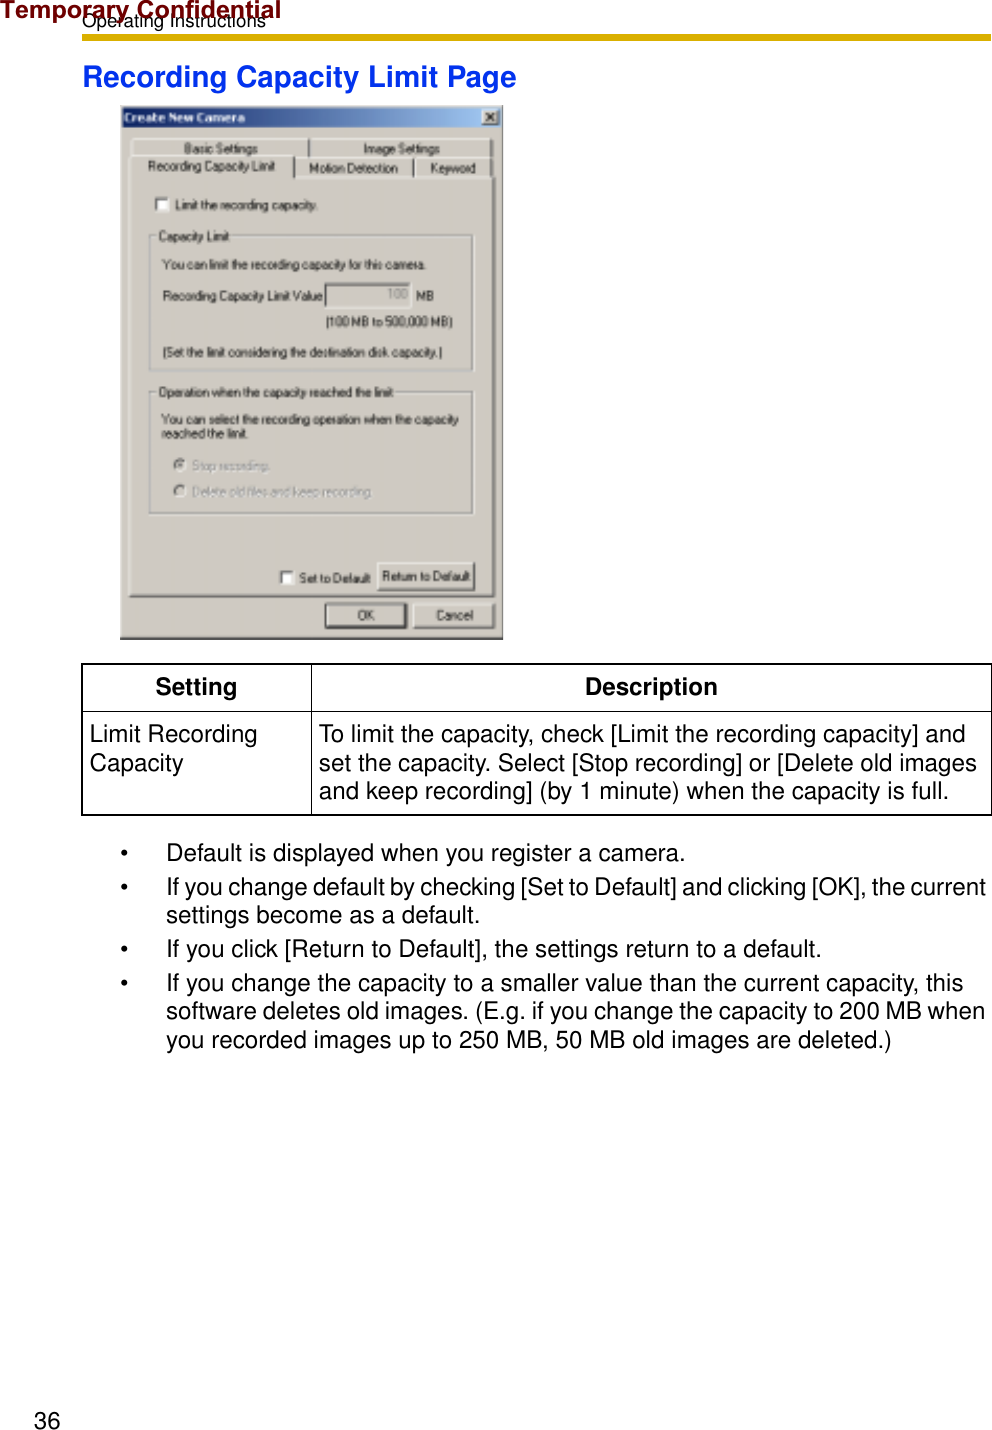 Operating Instructions36Recording Capacity Limit Page• Default is displayed when you register a camera.• If you change default by checking [Set to Default] and clicking [OK], the current settings become as a default.• If you click [Return to Default], the settings return to a default.• If you change the capacity to a smaller value than the current capacity, this software deletes old images. (E.g. if you change the capacity to 200 MB when you recorded images up to 250 MB, 50 MB old images are deleted.)Setting DescriptionLimit Recording Capacity To limit the capacity, check [Limit the recording capacity] and set the capacity. Select [Stop recording] or [Delete old images and keep recording] (by 1 minute) when the capacity is full.Temporary Confidential